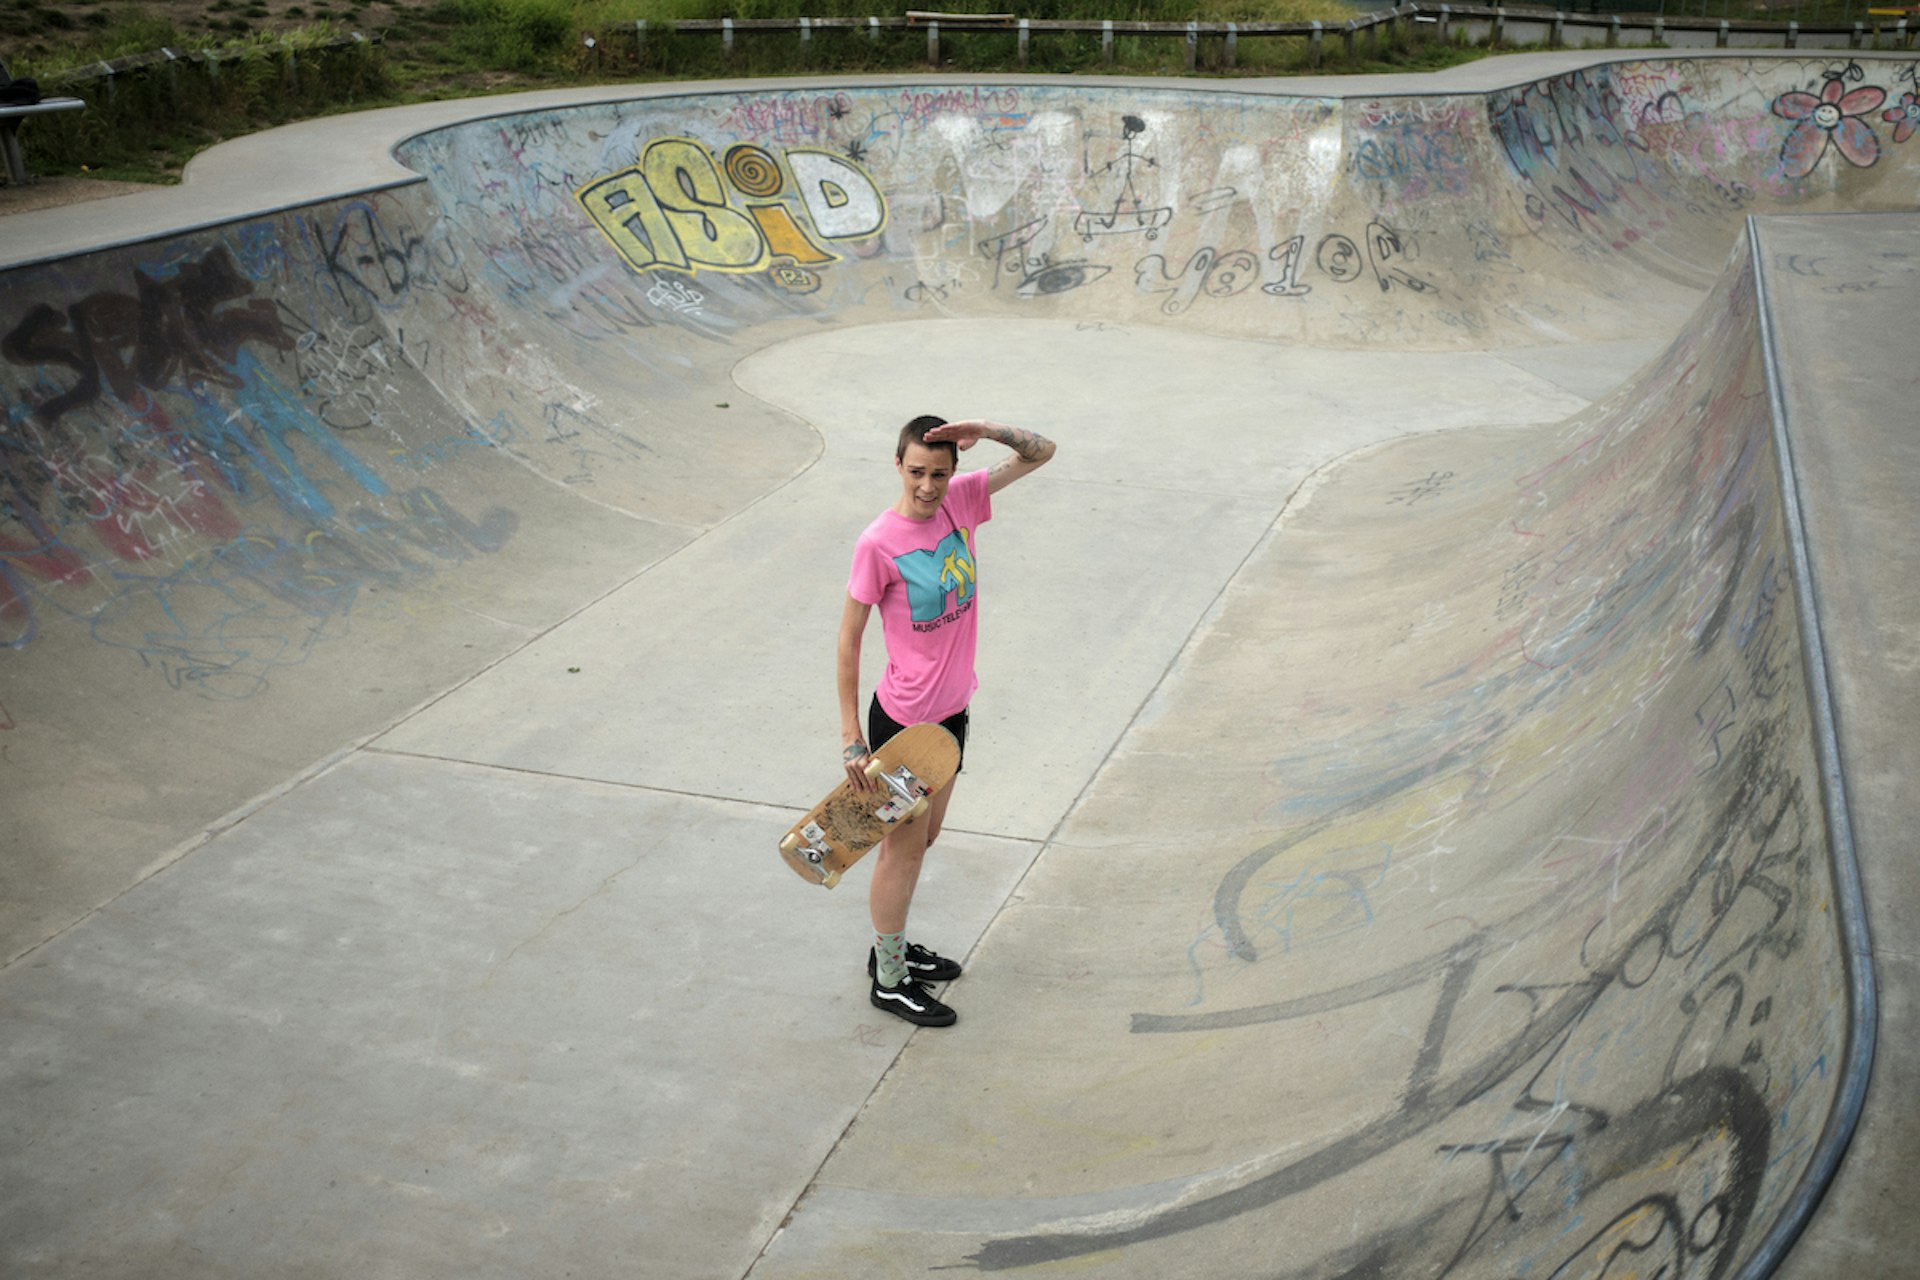 Rae Smith is pushing the boundaries of who skate is for